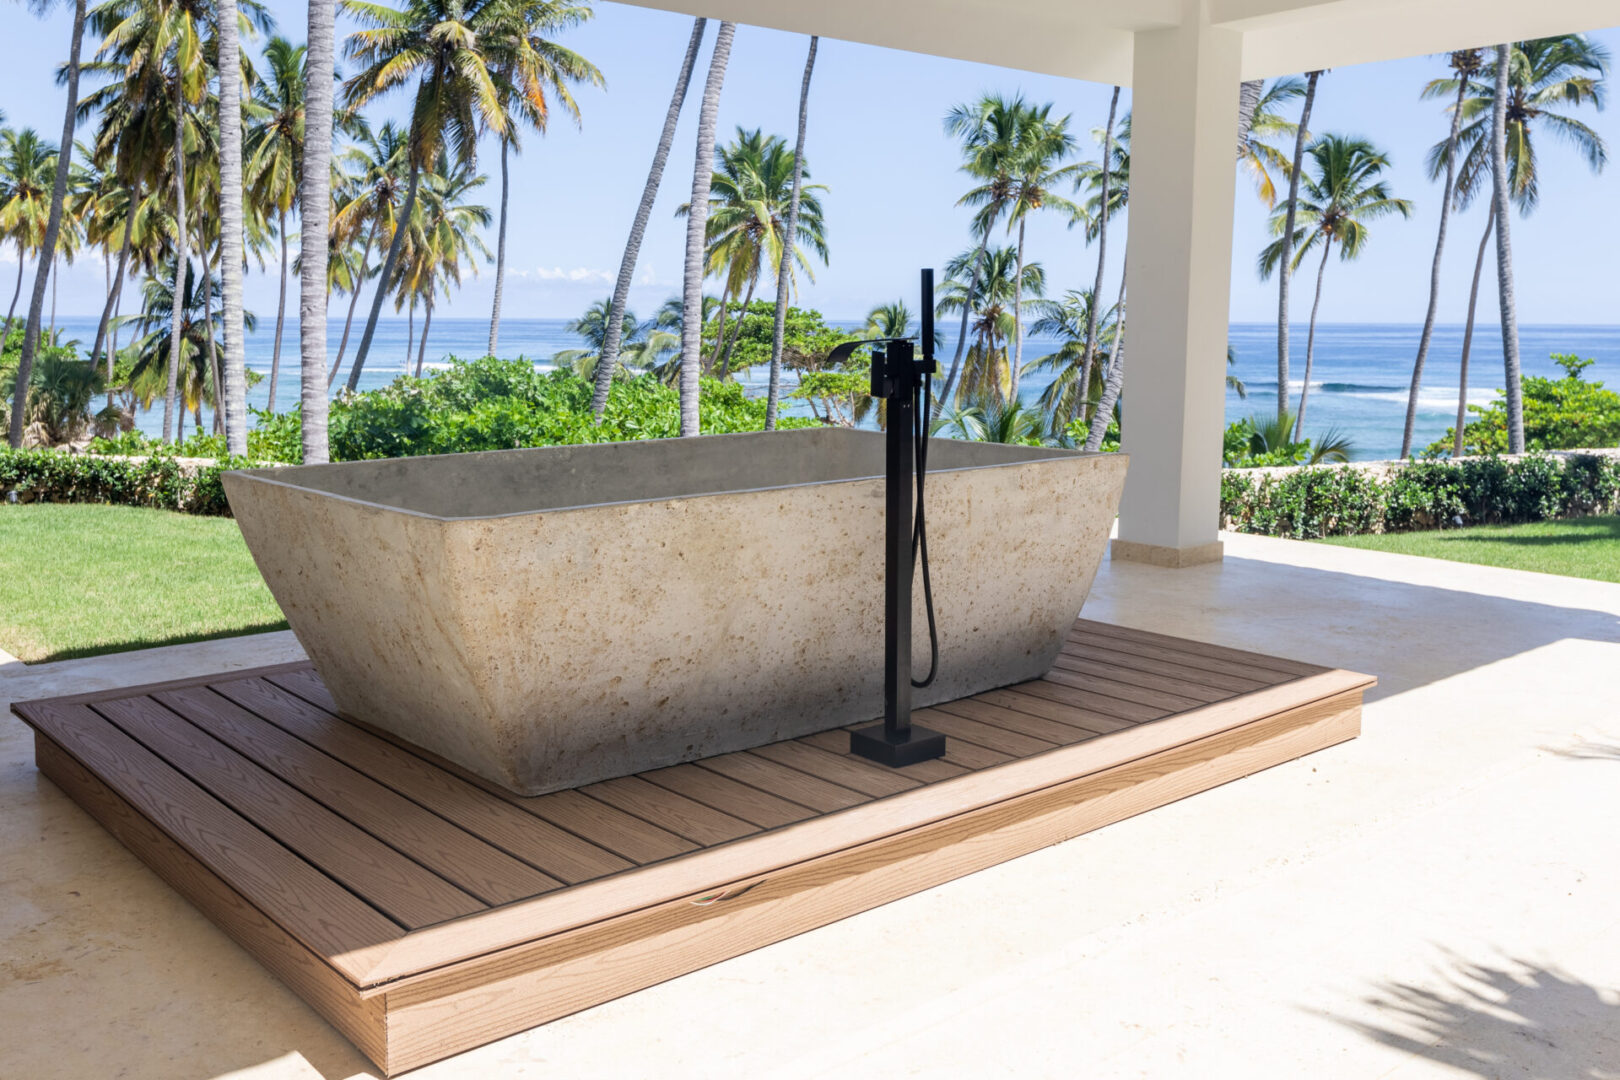 A concrete tub sitting on top of a wooden deck.